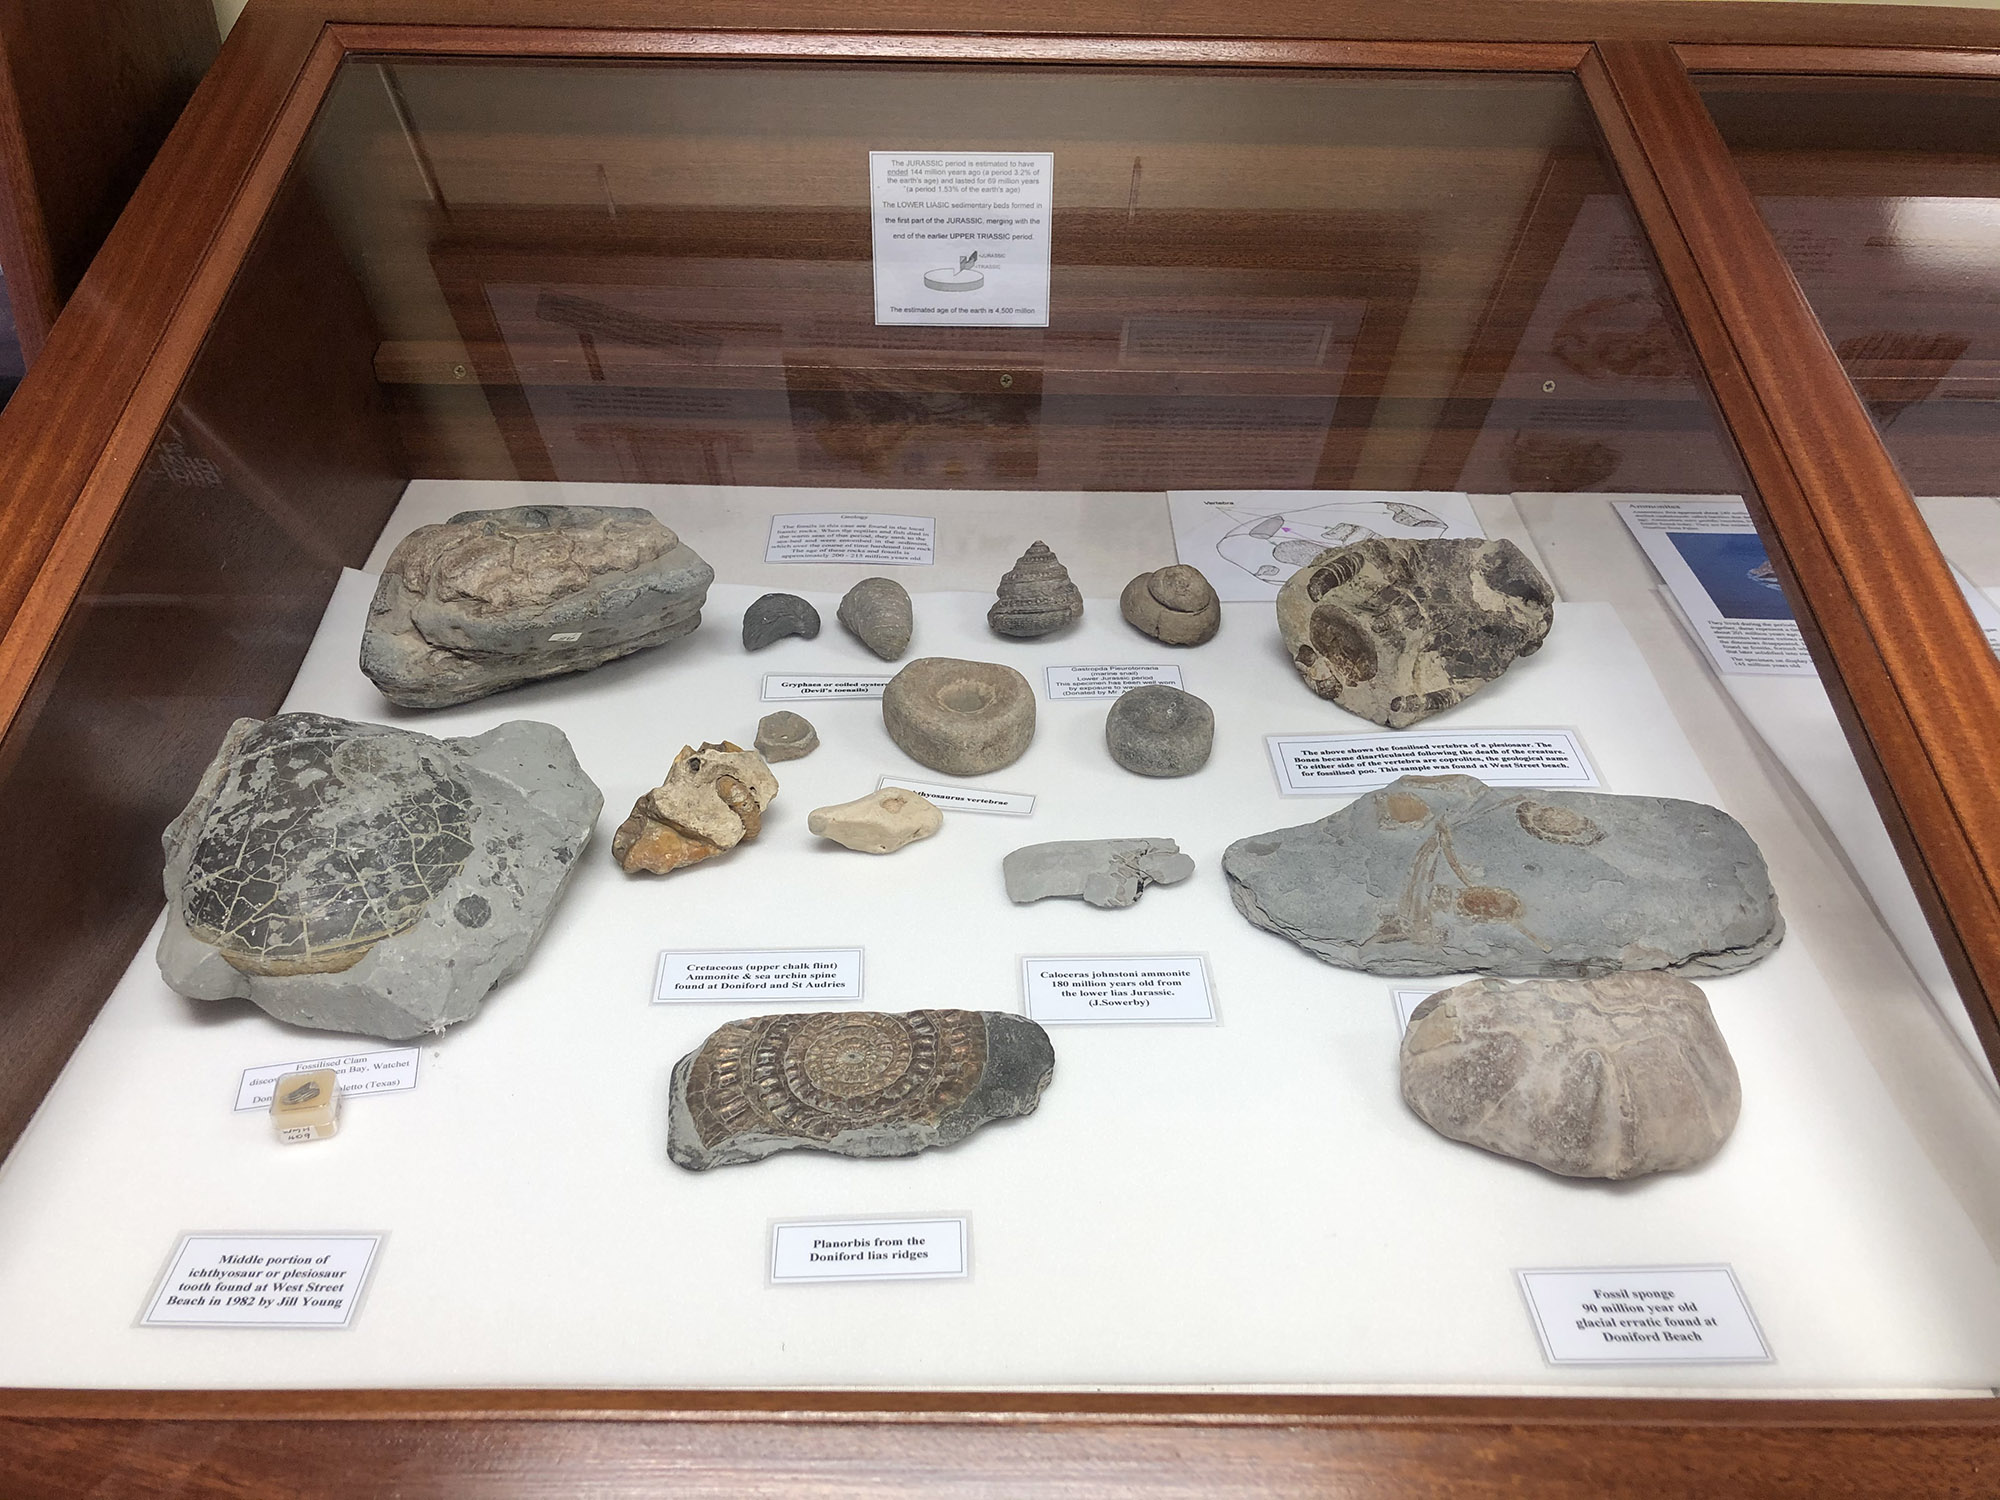 Small fossils on display at the museum